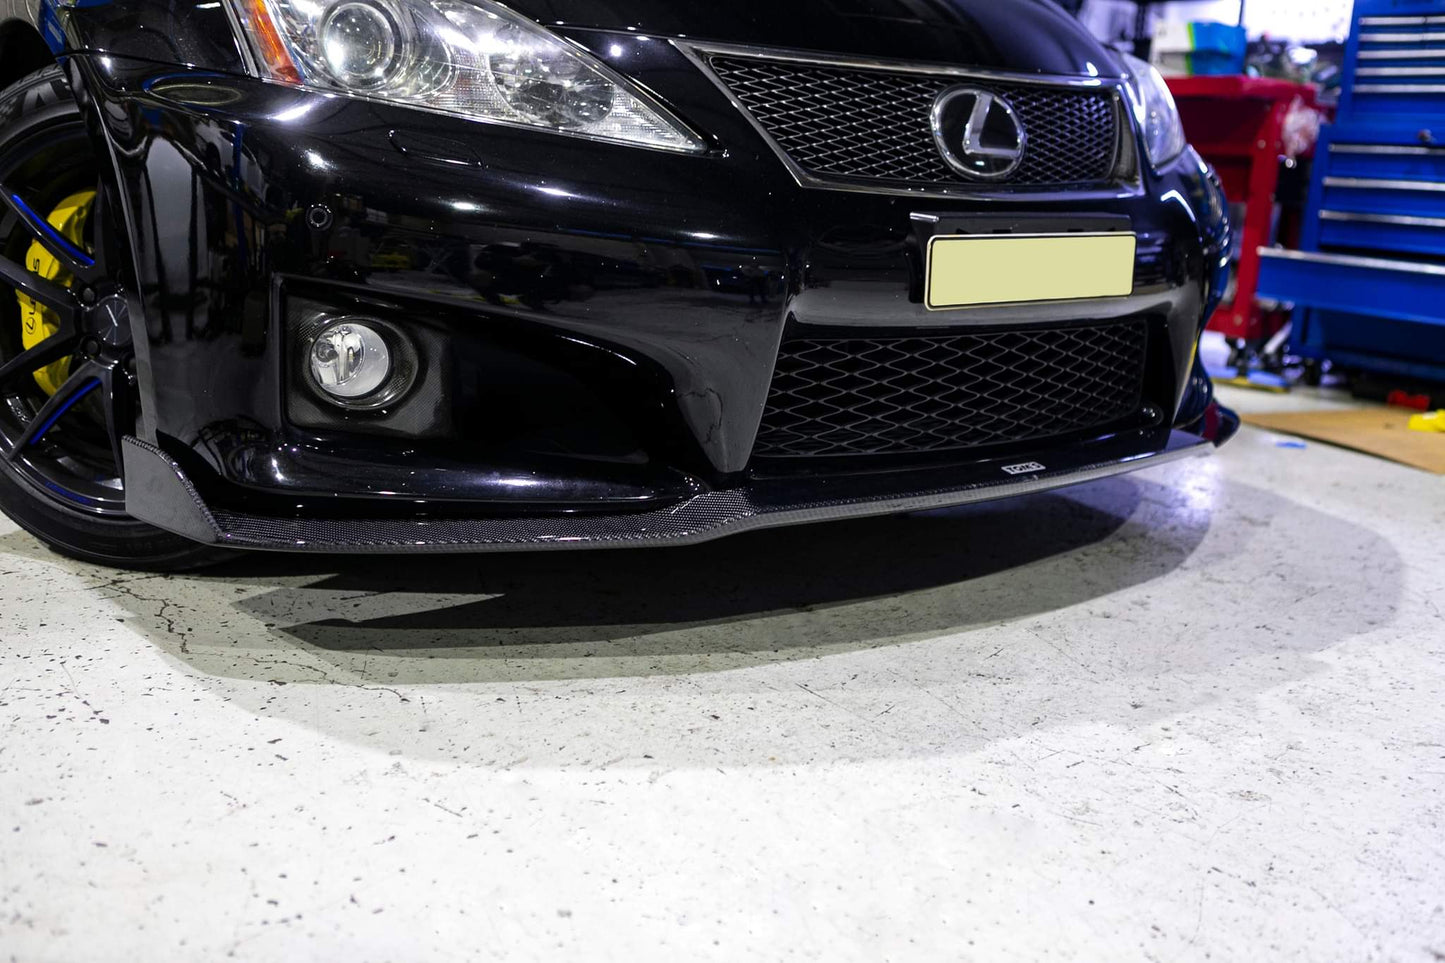 Toms Racing Front Diffuser For Lexus ISF V2 Type